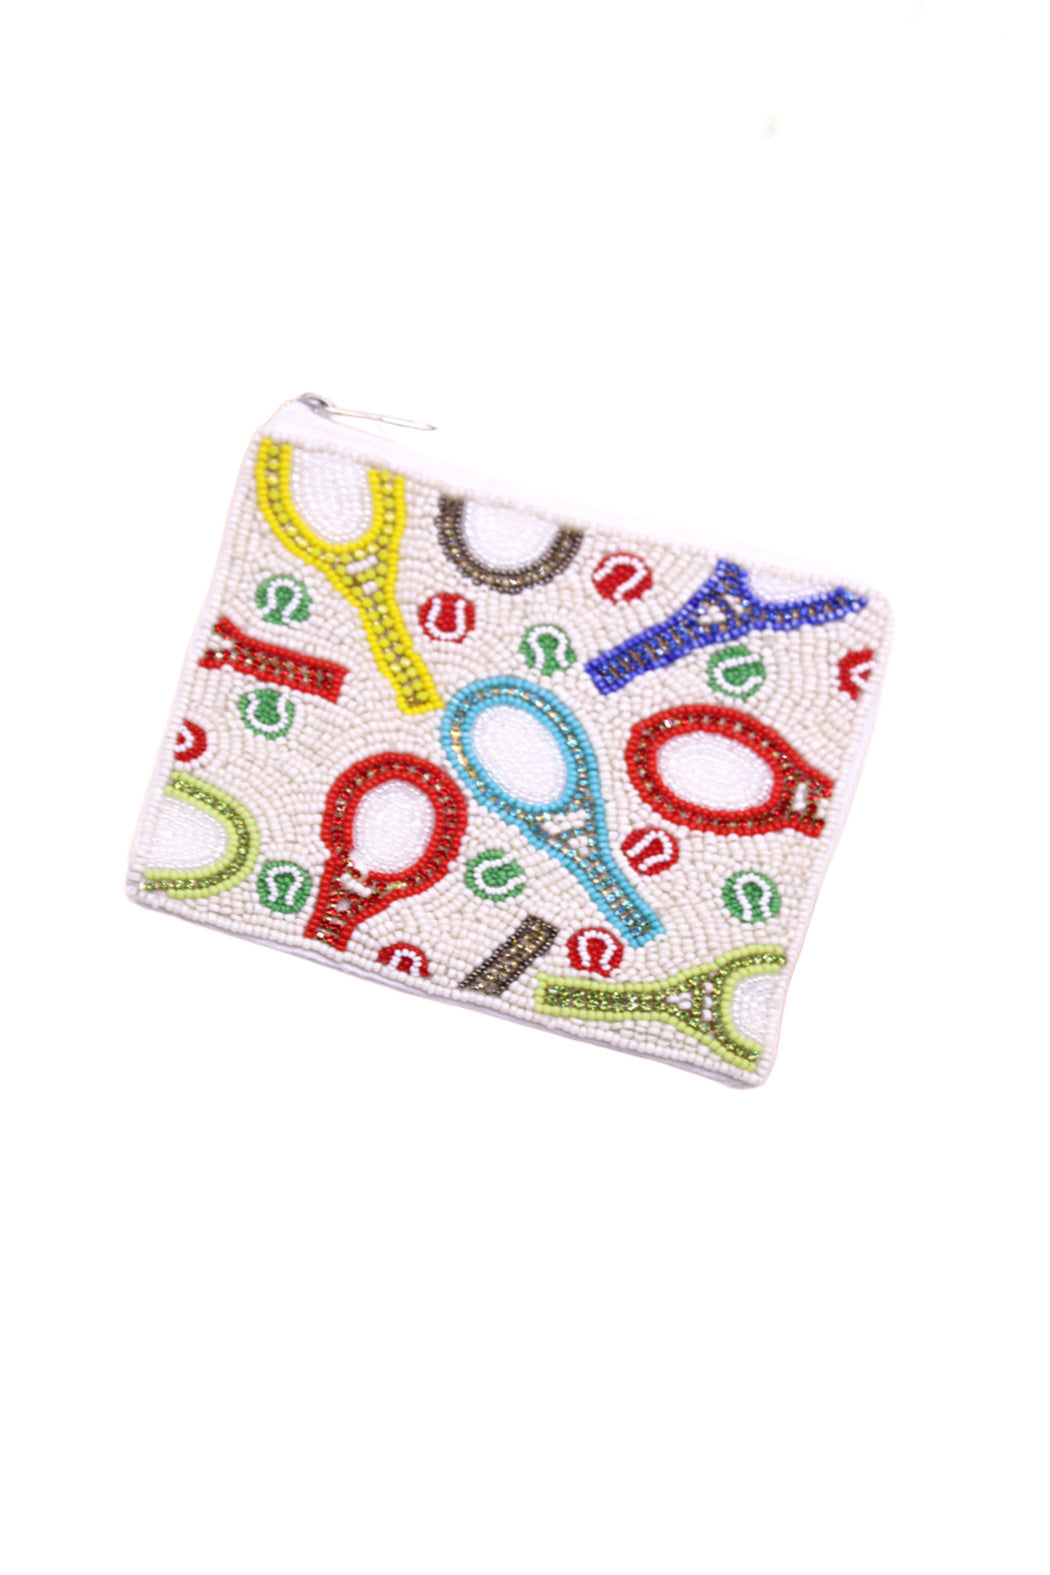 Tennis Racquets and Balls Beaded Pouch